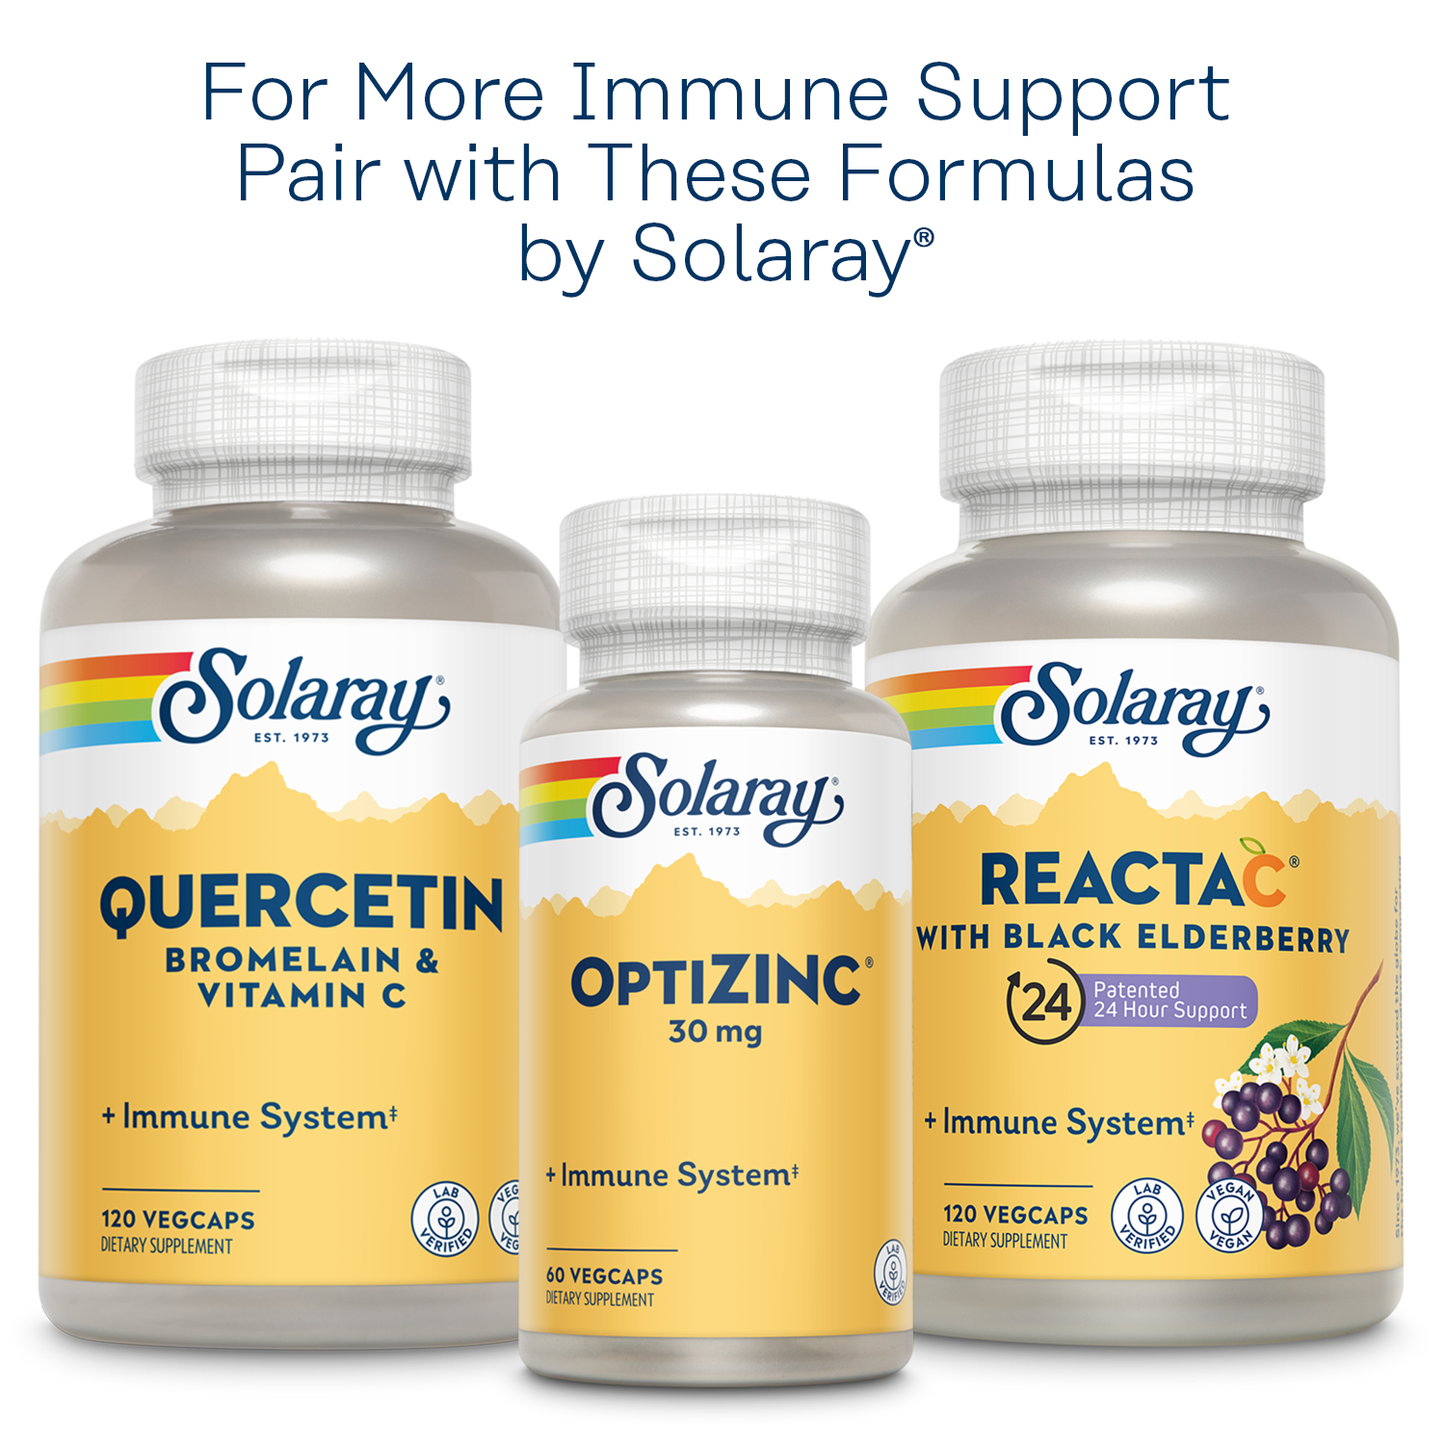 Solaray L-Lysine Monolaurin Immune Support Supplement, 1:1 Ratio for Immune System Function, Skin and Gut Health Support, 500 mg Each, 60-Day Money Back Guarantee, 30 Servings, 60 VegCaps